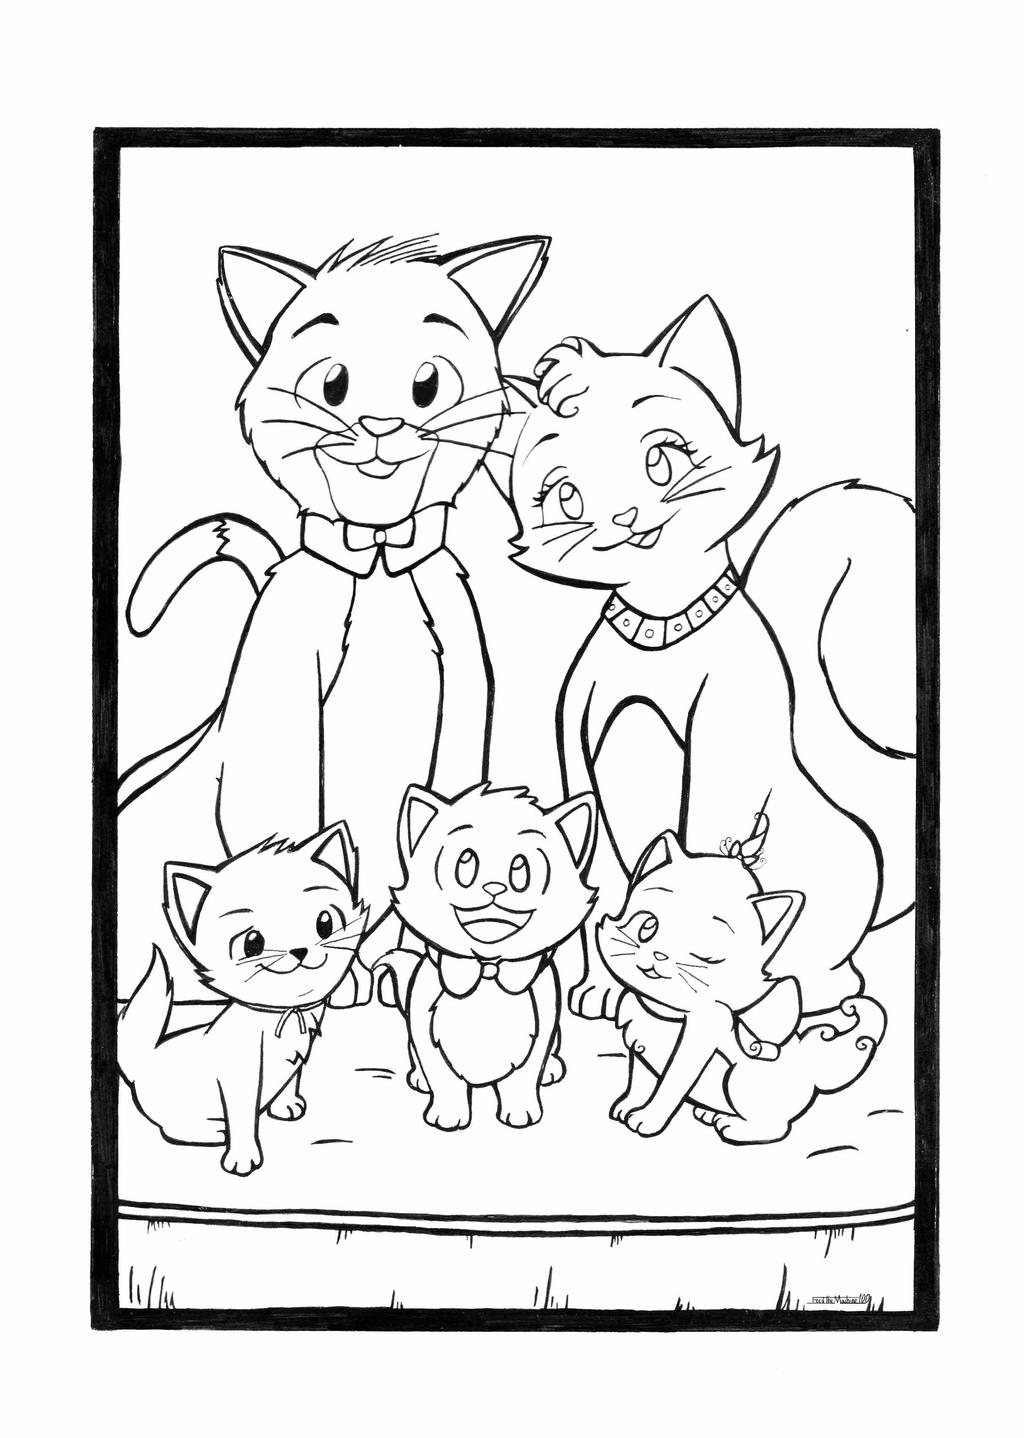 The Aristocats   Coloring page by FeedtheMachine20Art on DeviantArt